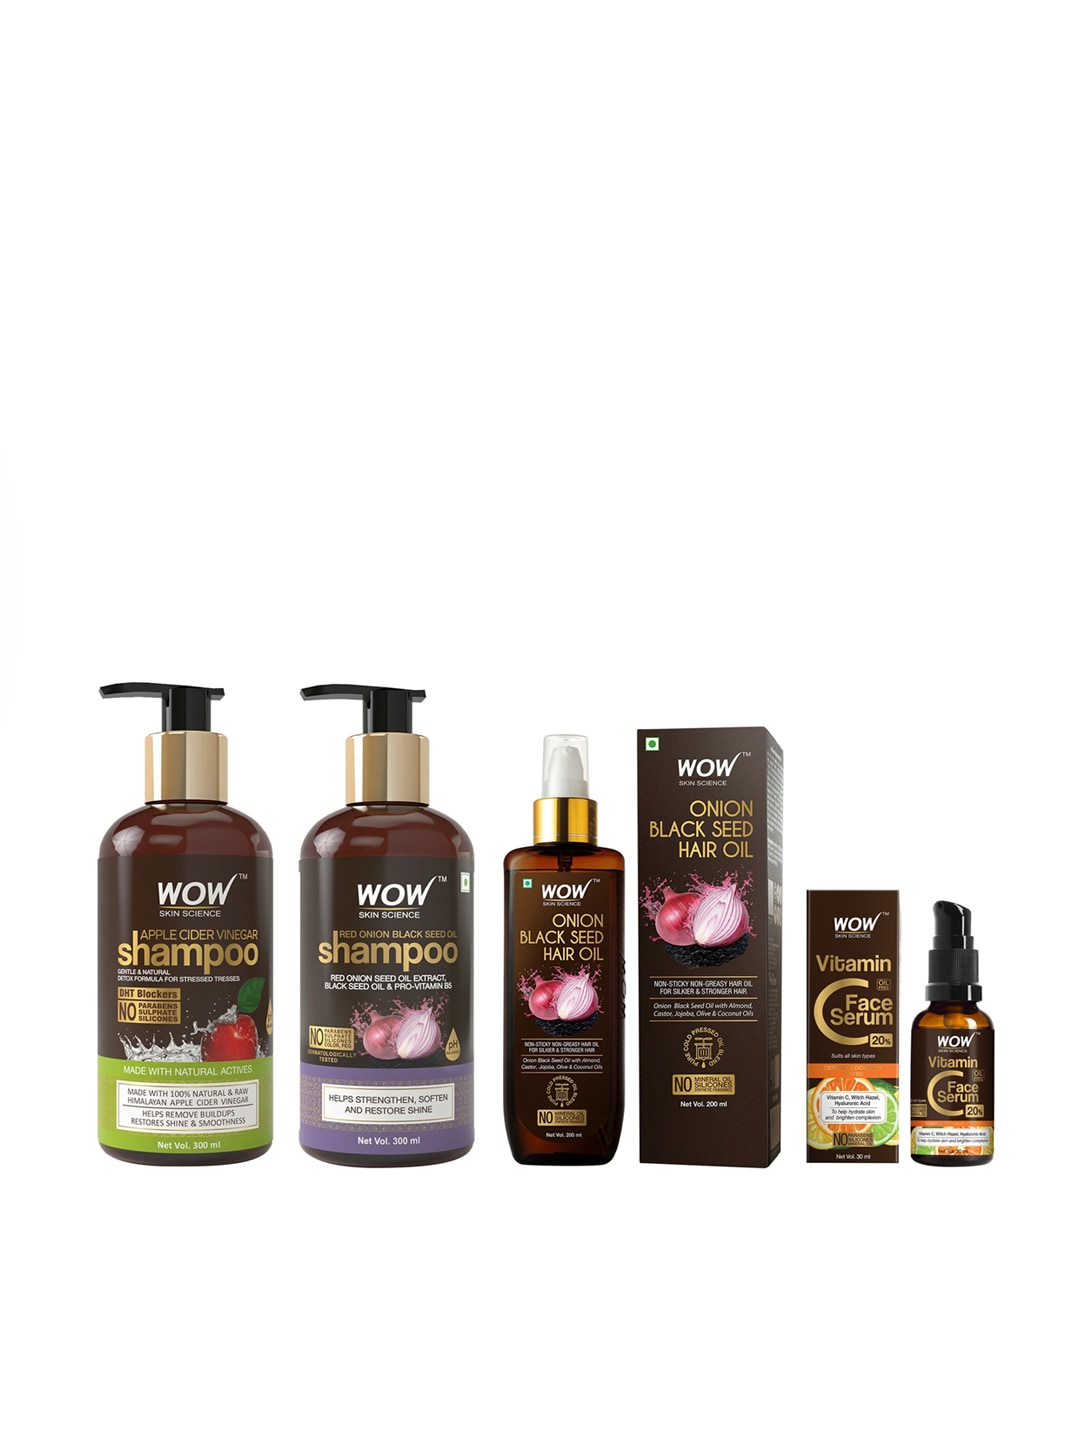 WOW SKIN SCIENCE Set of Onion Hair Oil & Apple Cider Vinegar Face Wash with  2 Shampoos Price in India, Full Specifications & Offers 